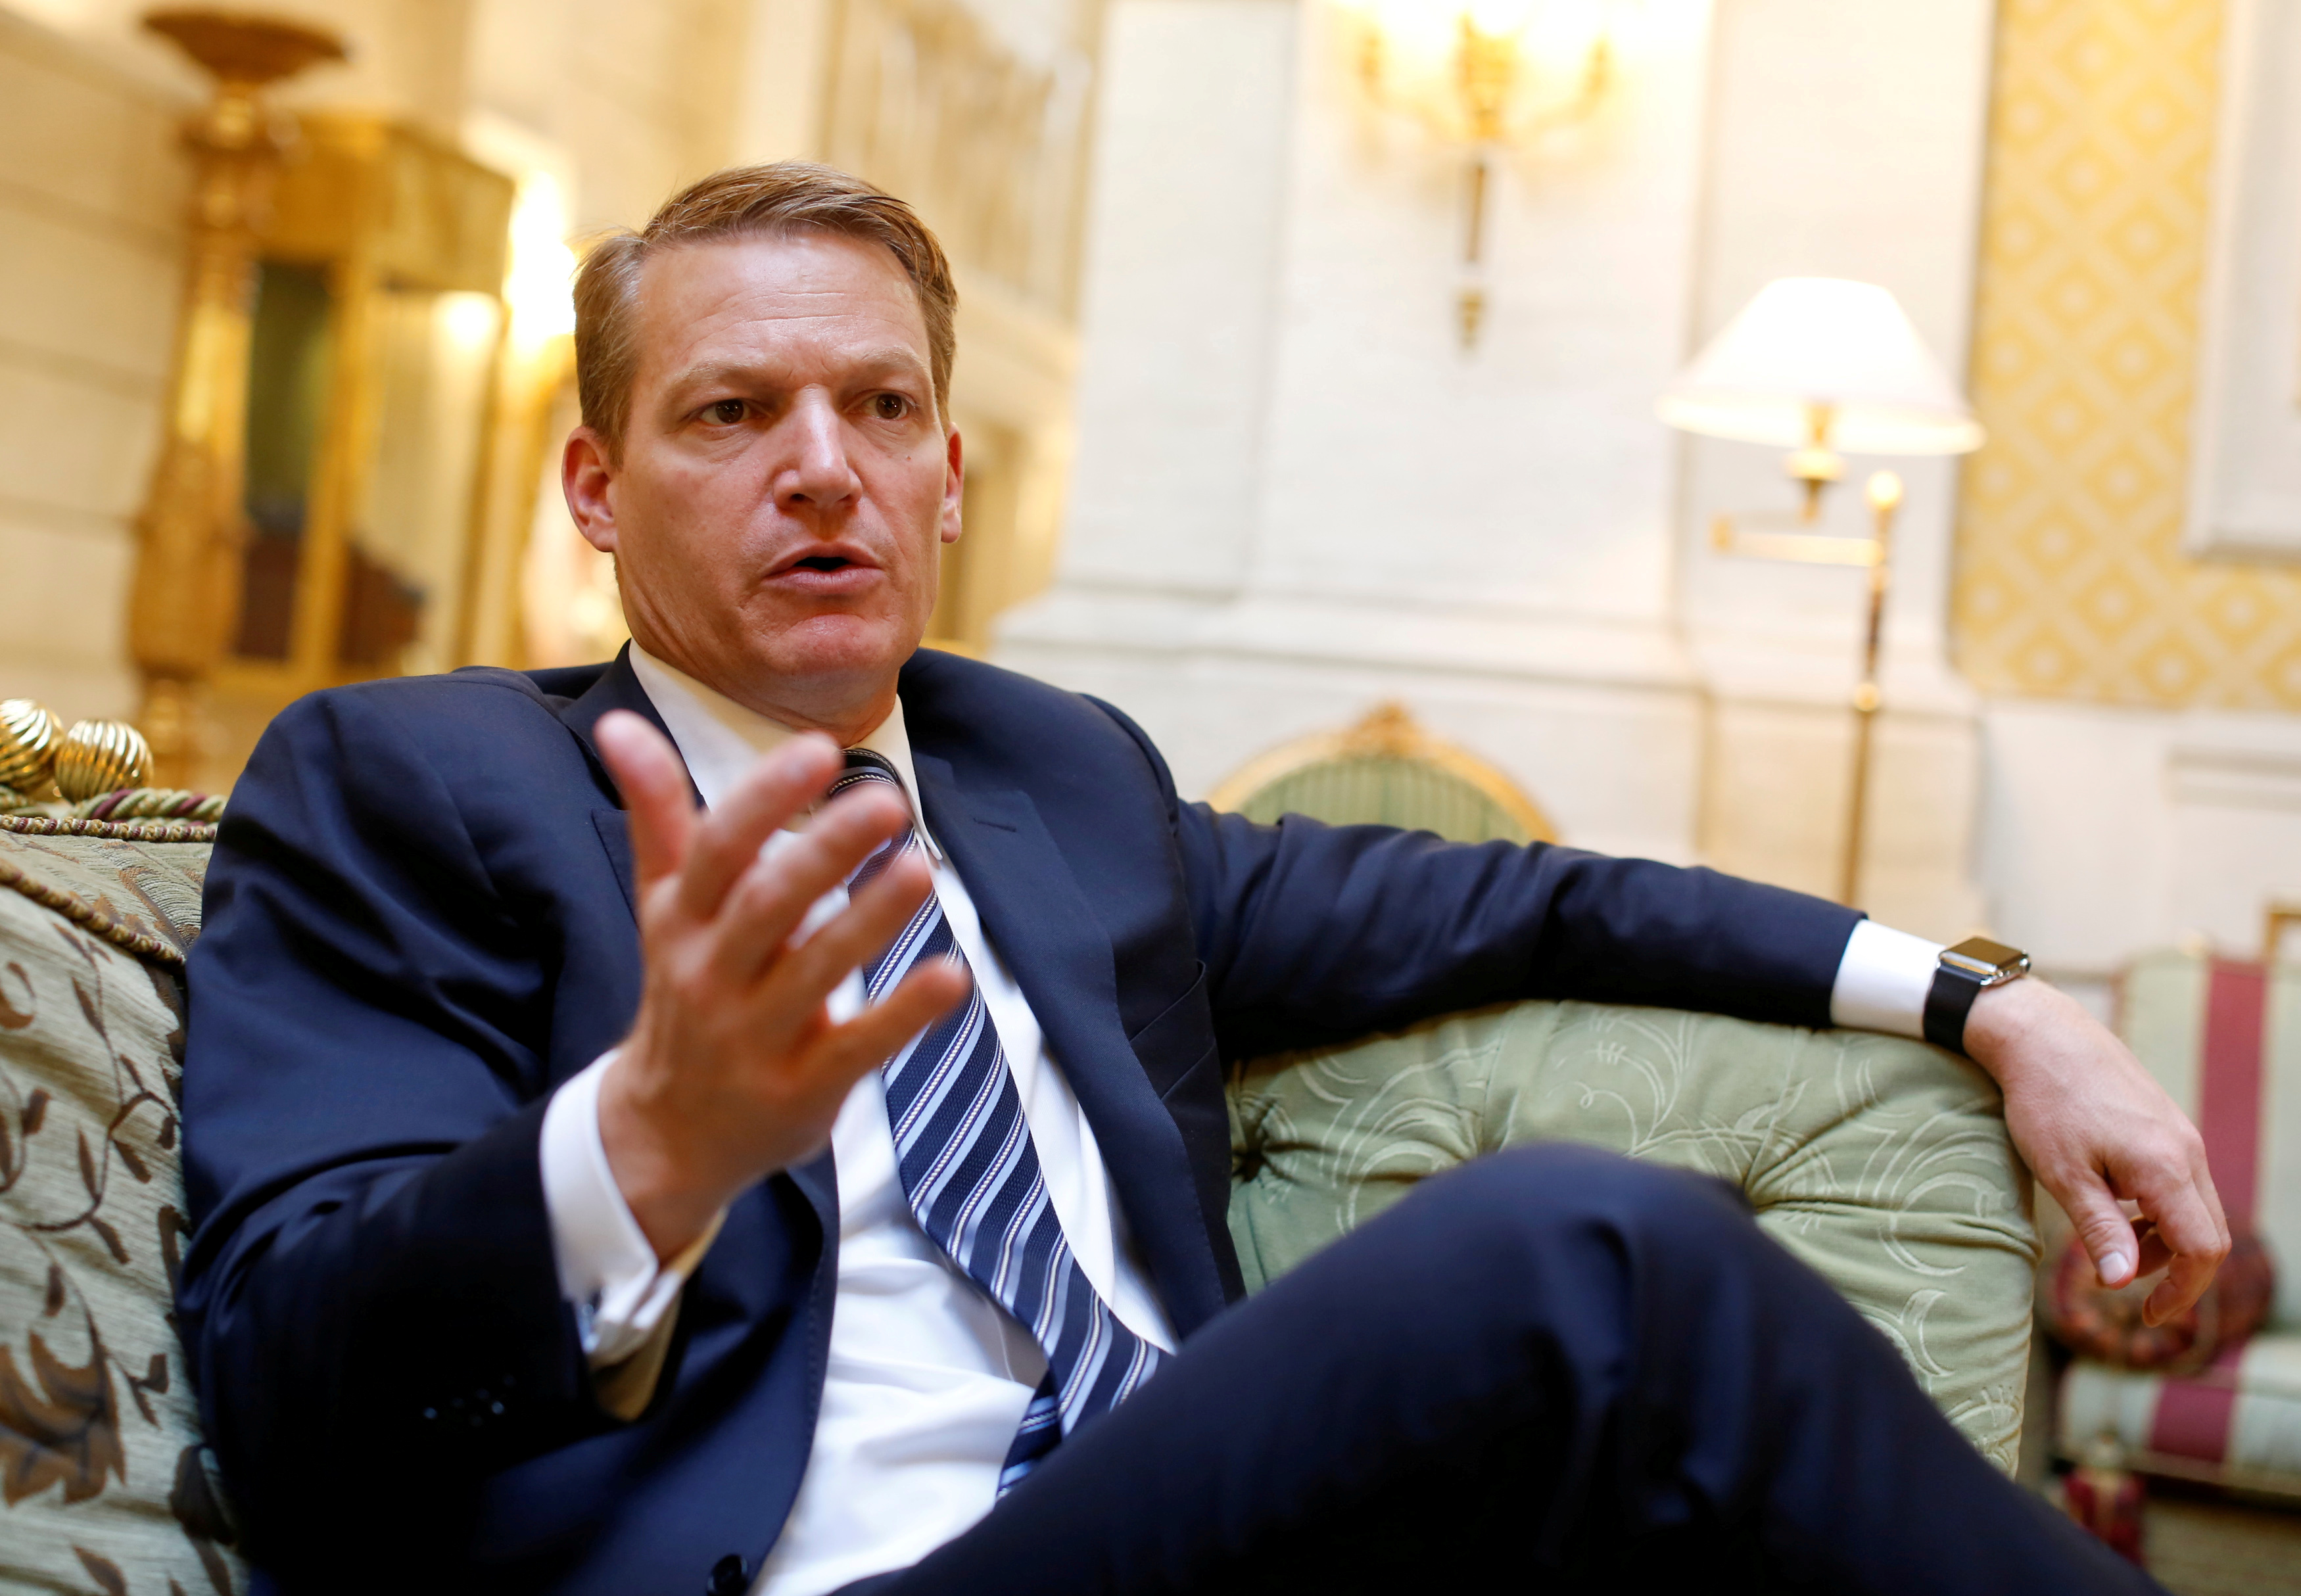 FireEye Chief Executive Officer (CEO) Kevin Mandia is seen during an interview in Rome, Italy June 8, 2017. REUTERS/Tony Gentile/File Photo